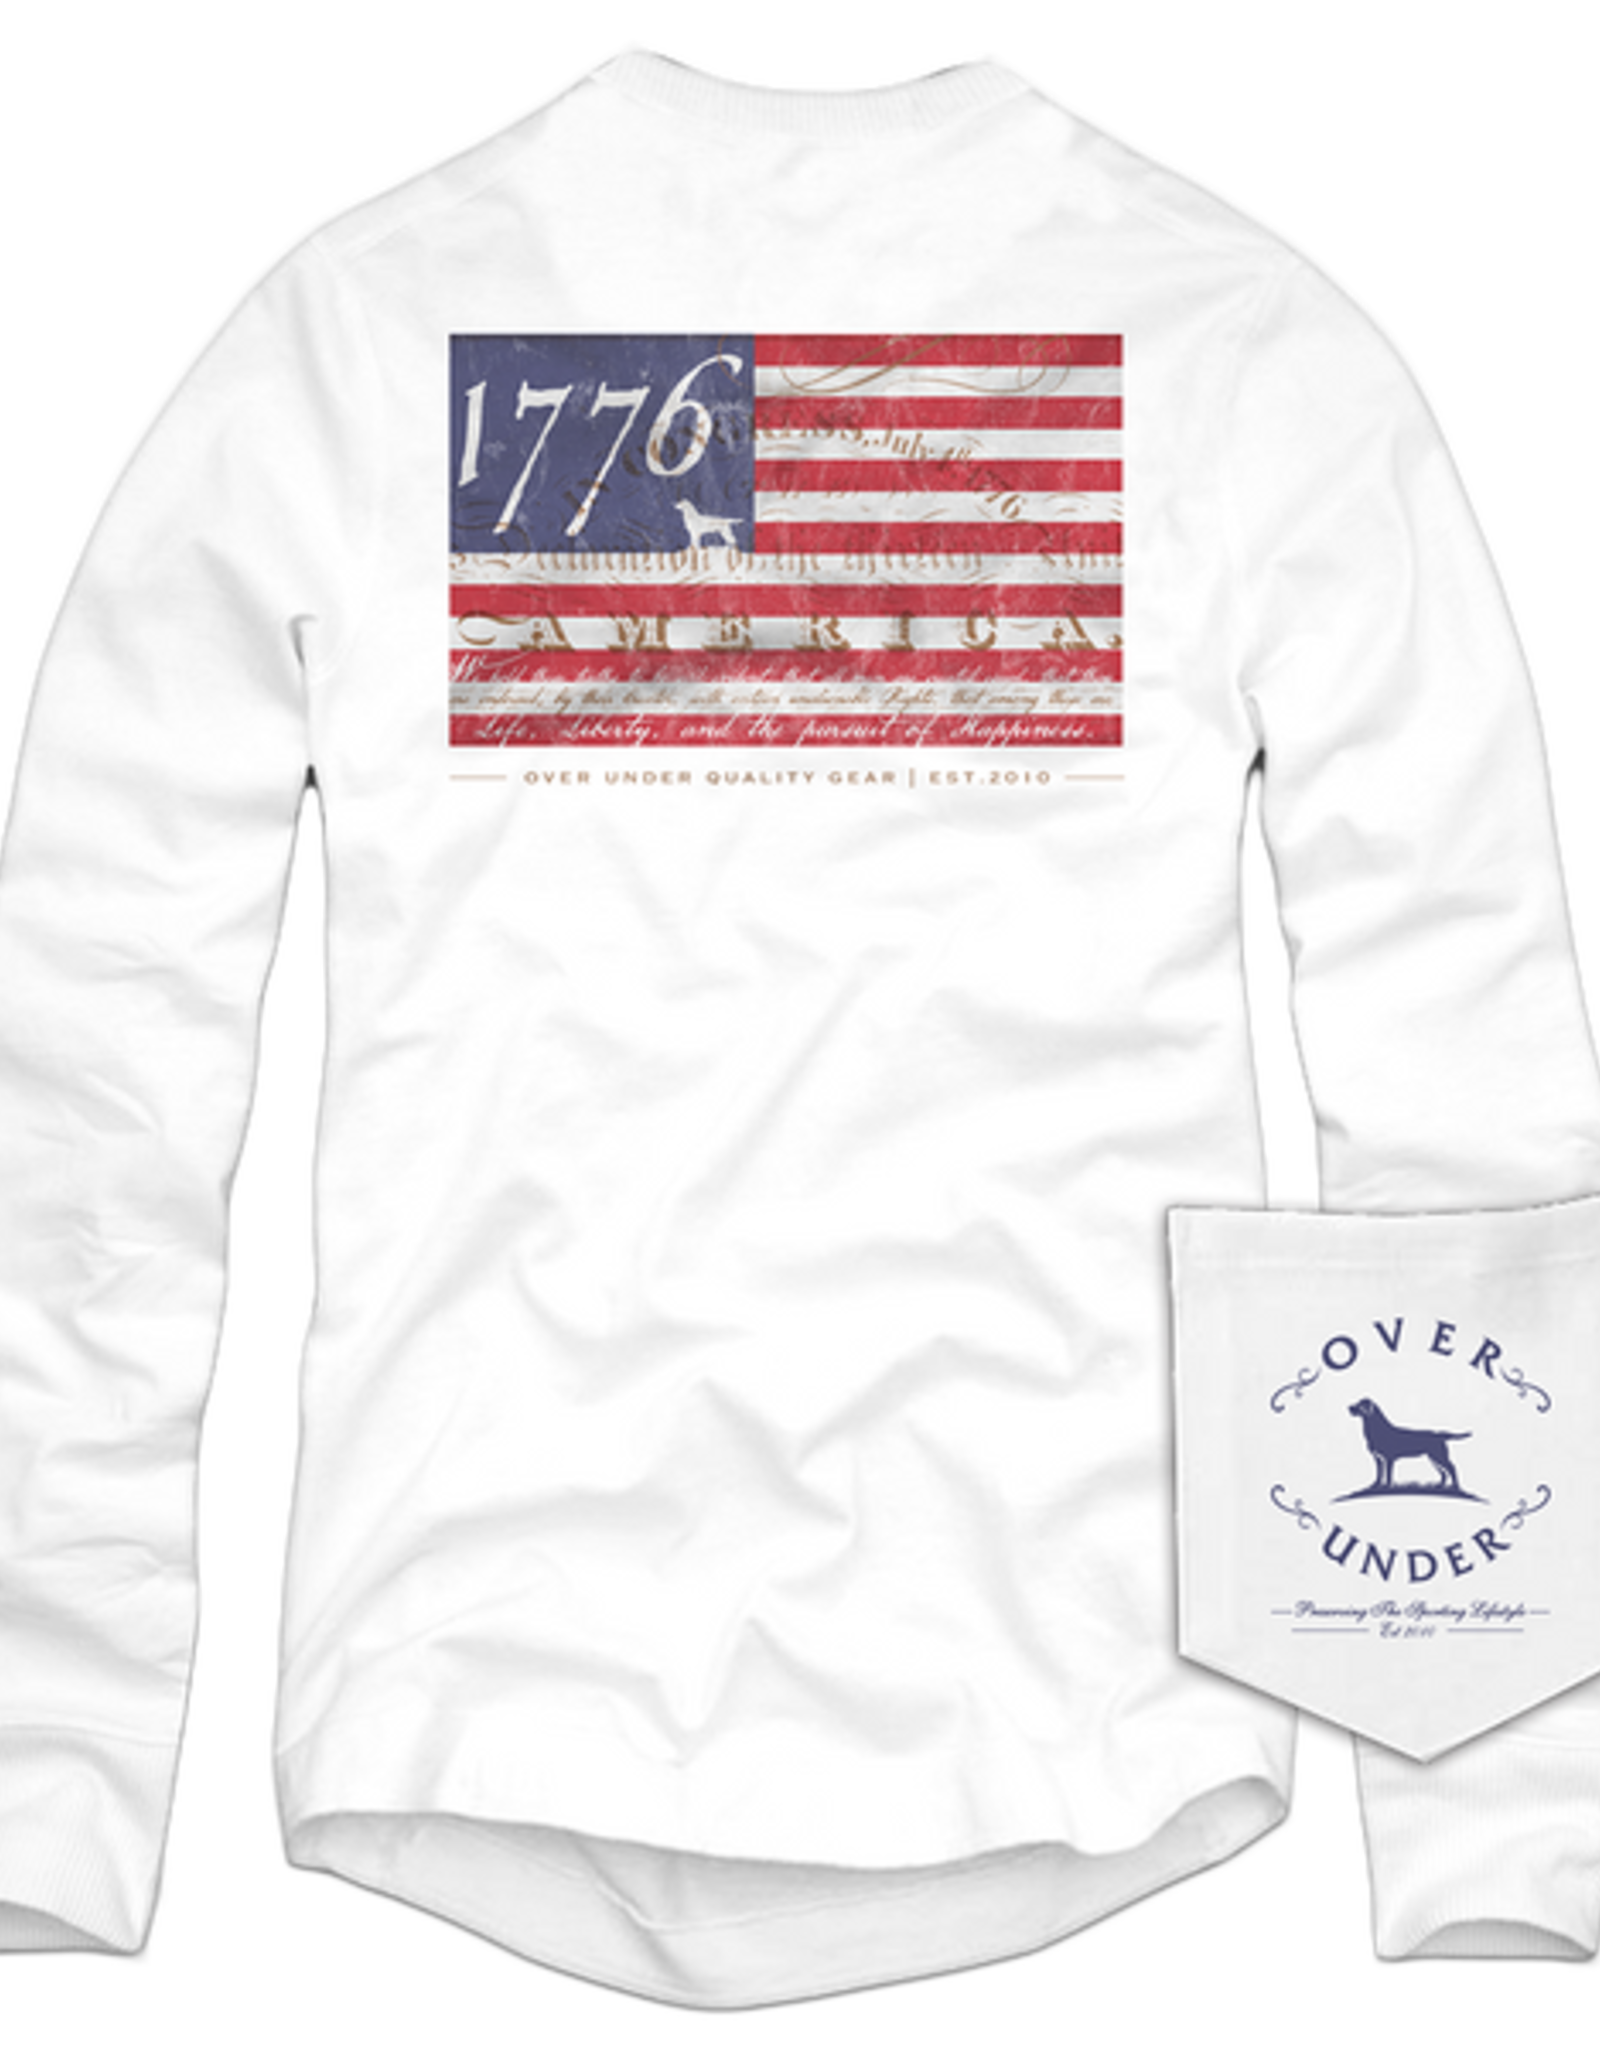 Over Under Clothing 1776 T-Shirt LS